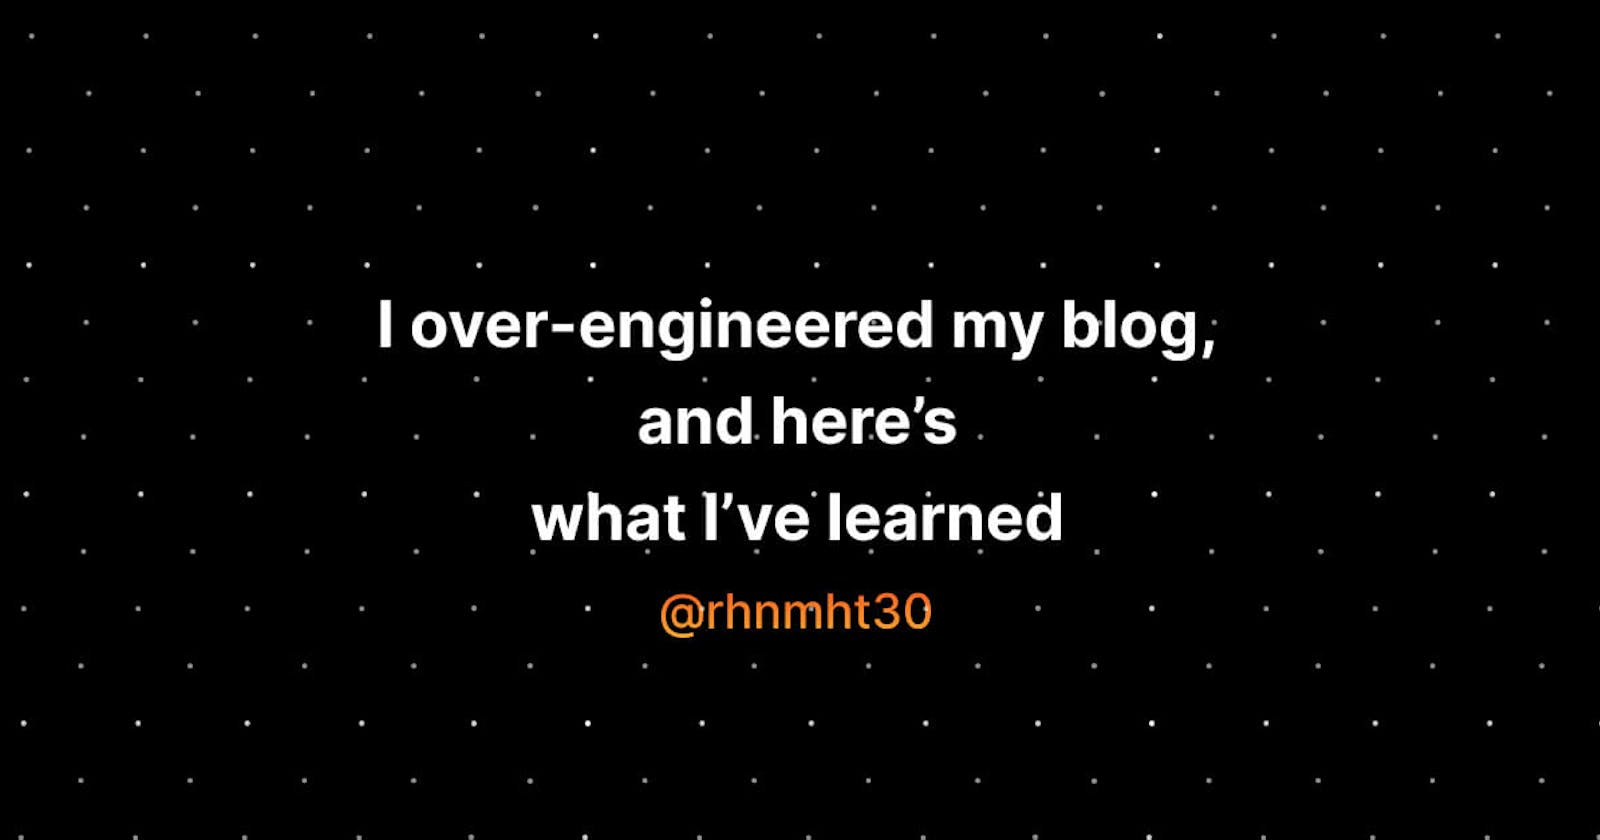 I over-engineered my blog, and here’s what I’ve learned